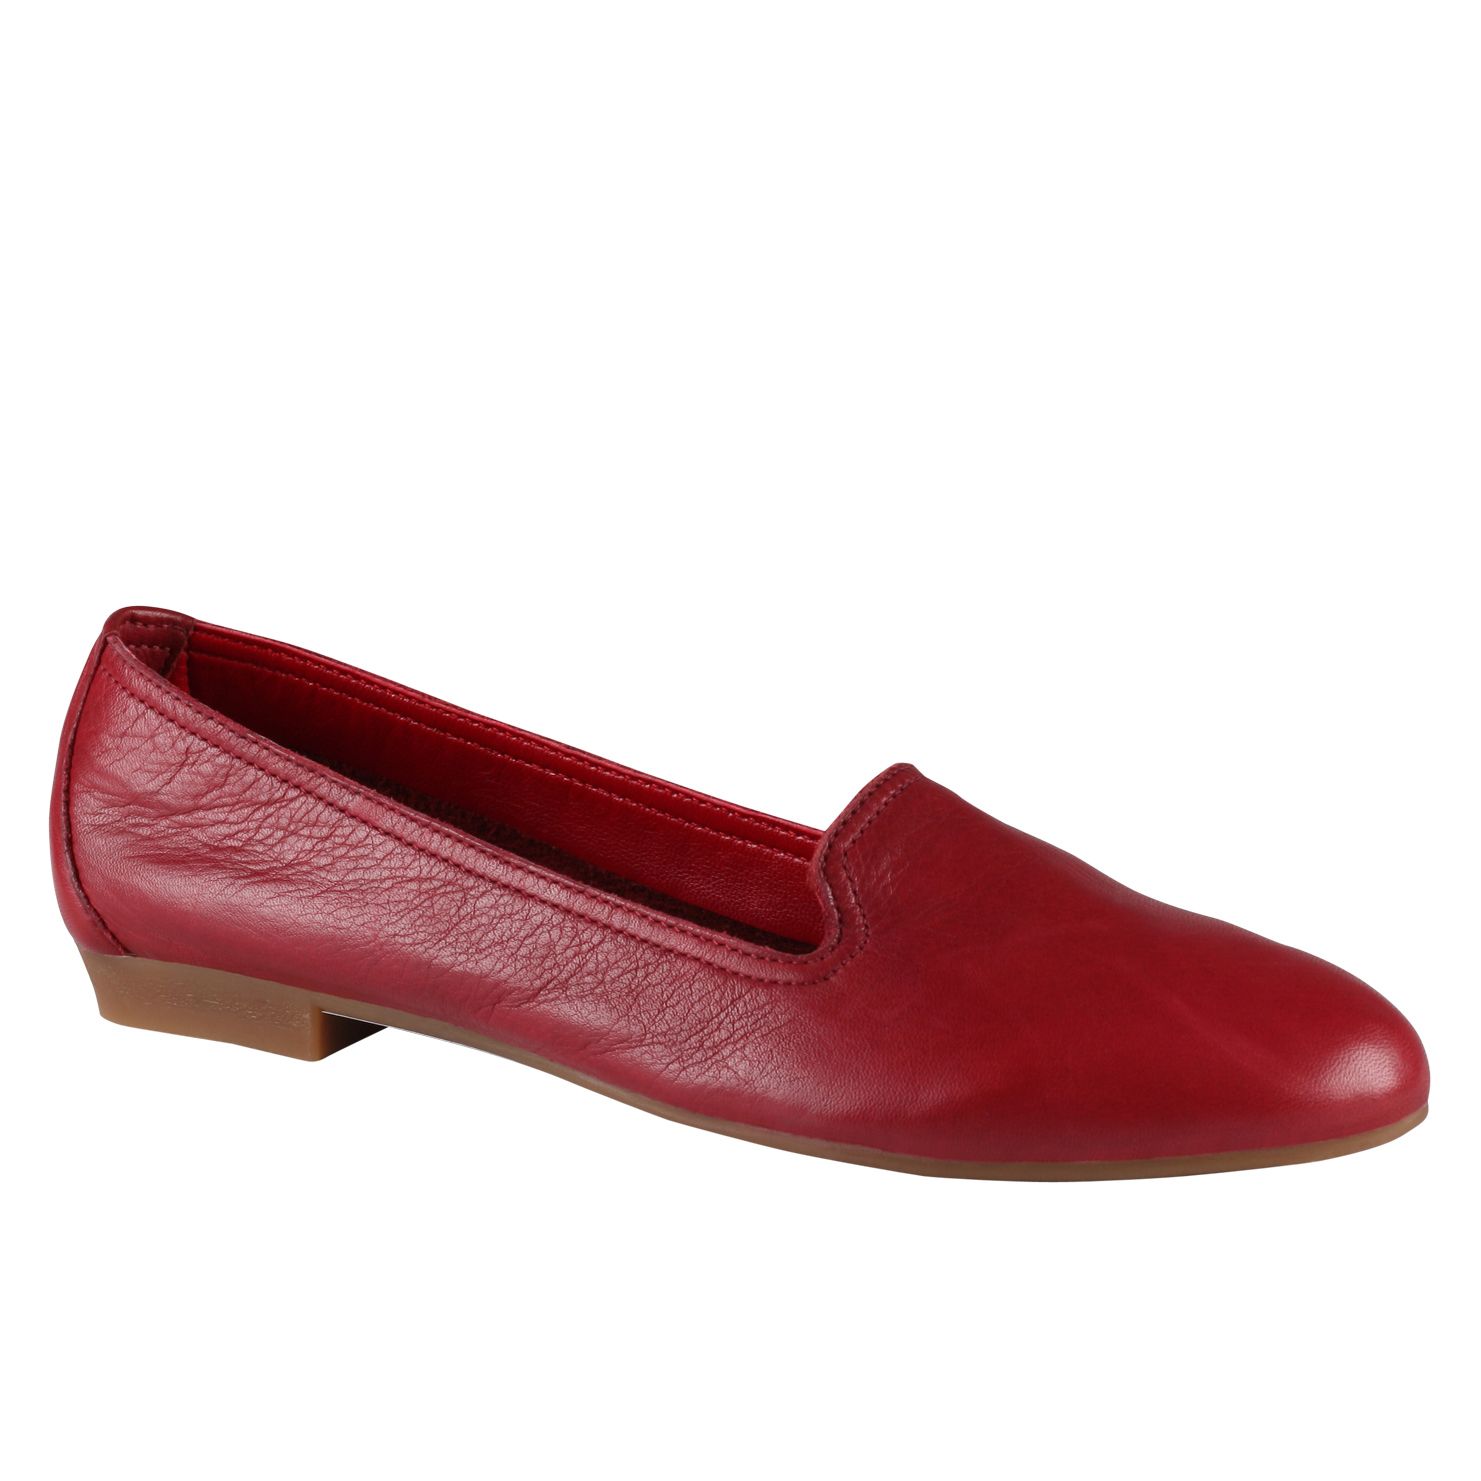 Aldo Zenica Leather Loafer Shoes in Red | Lyst